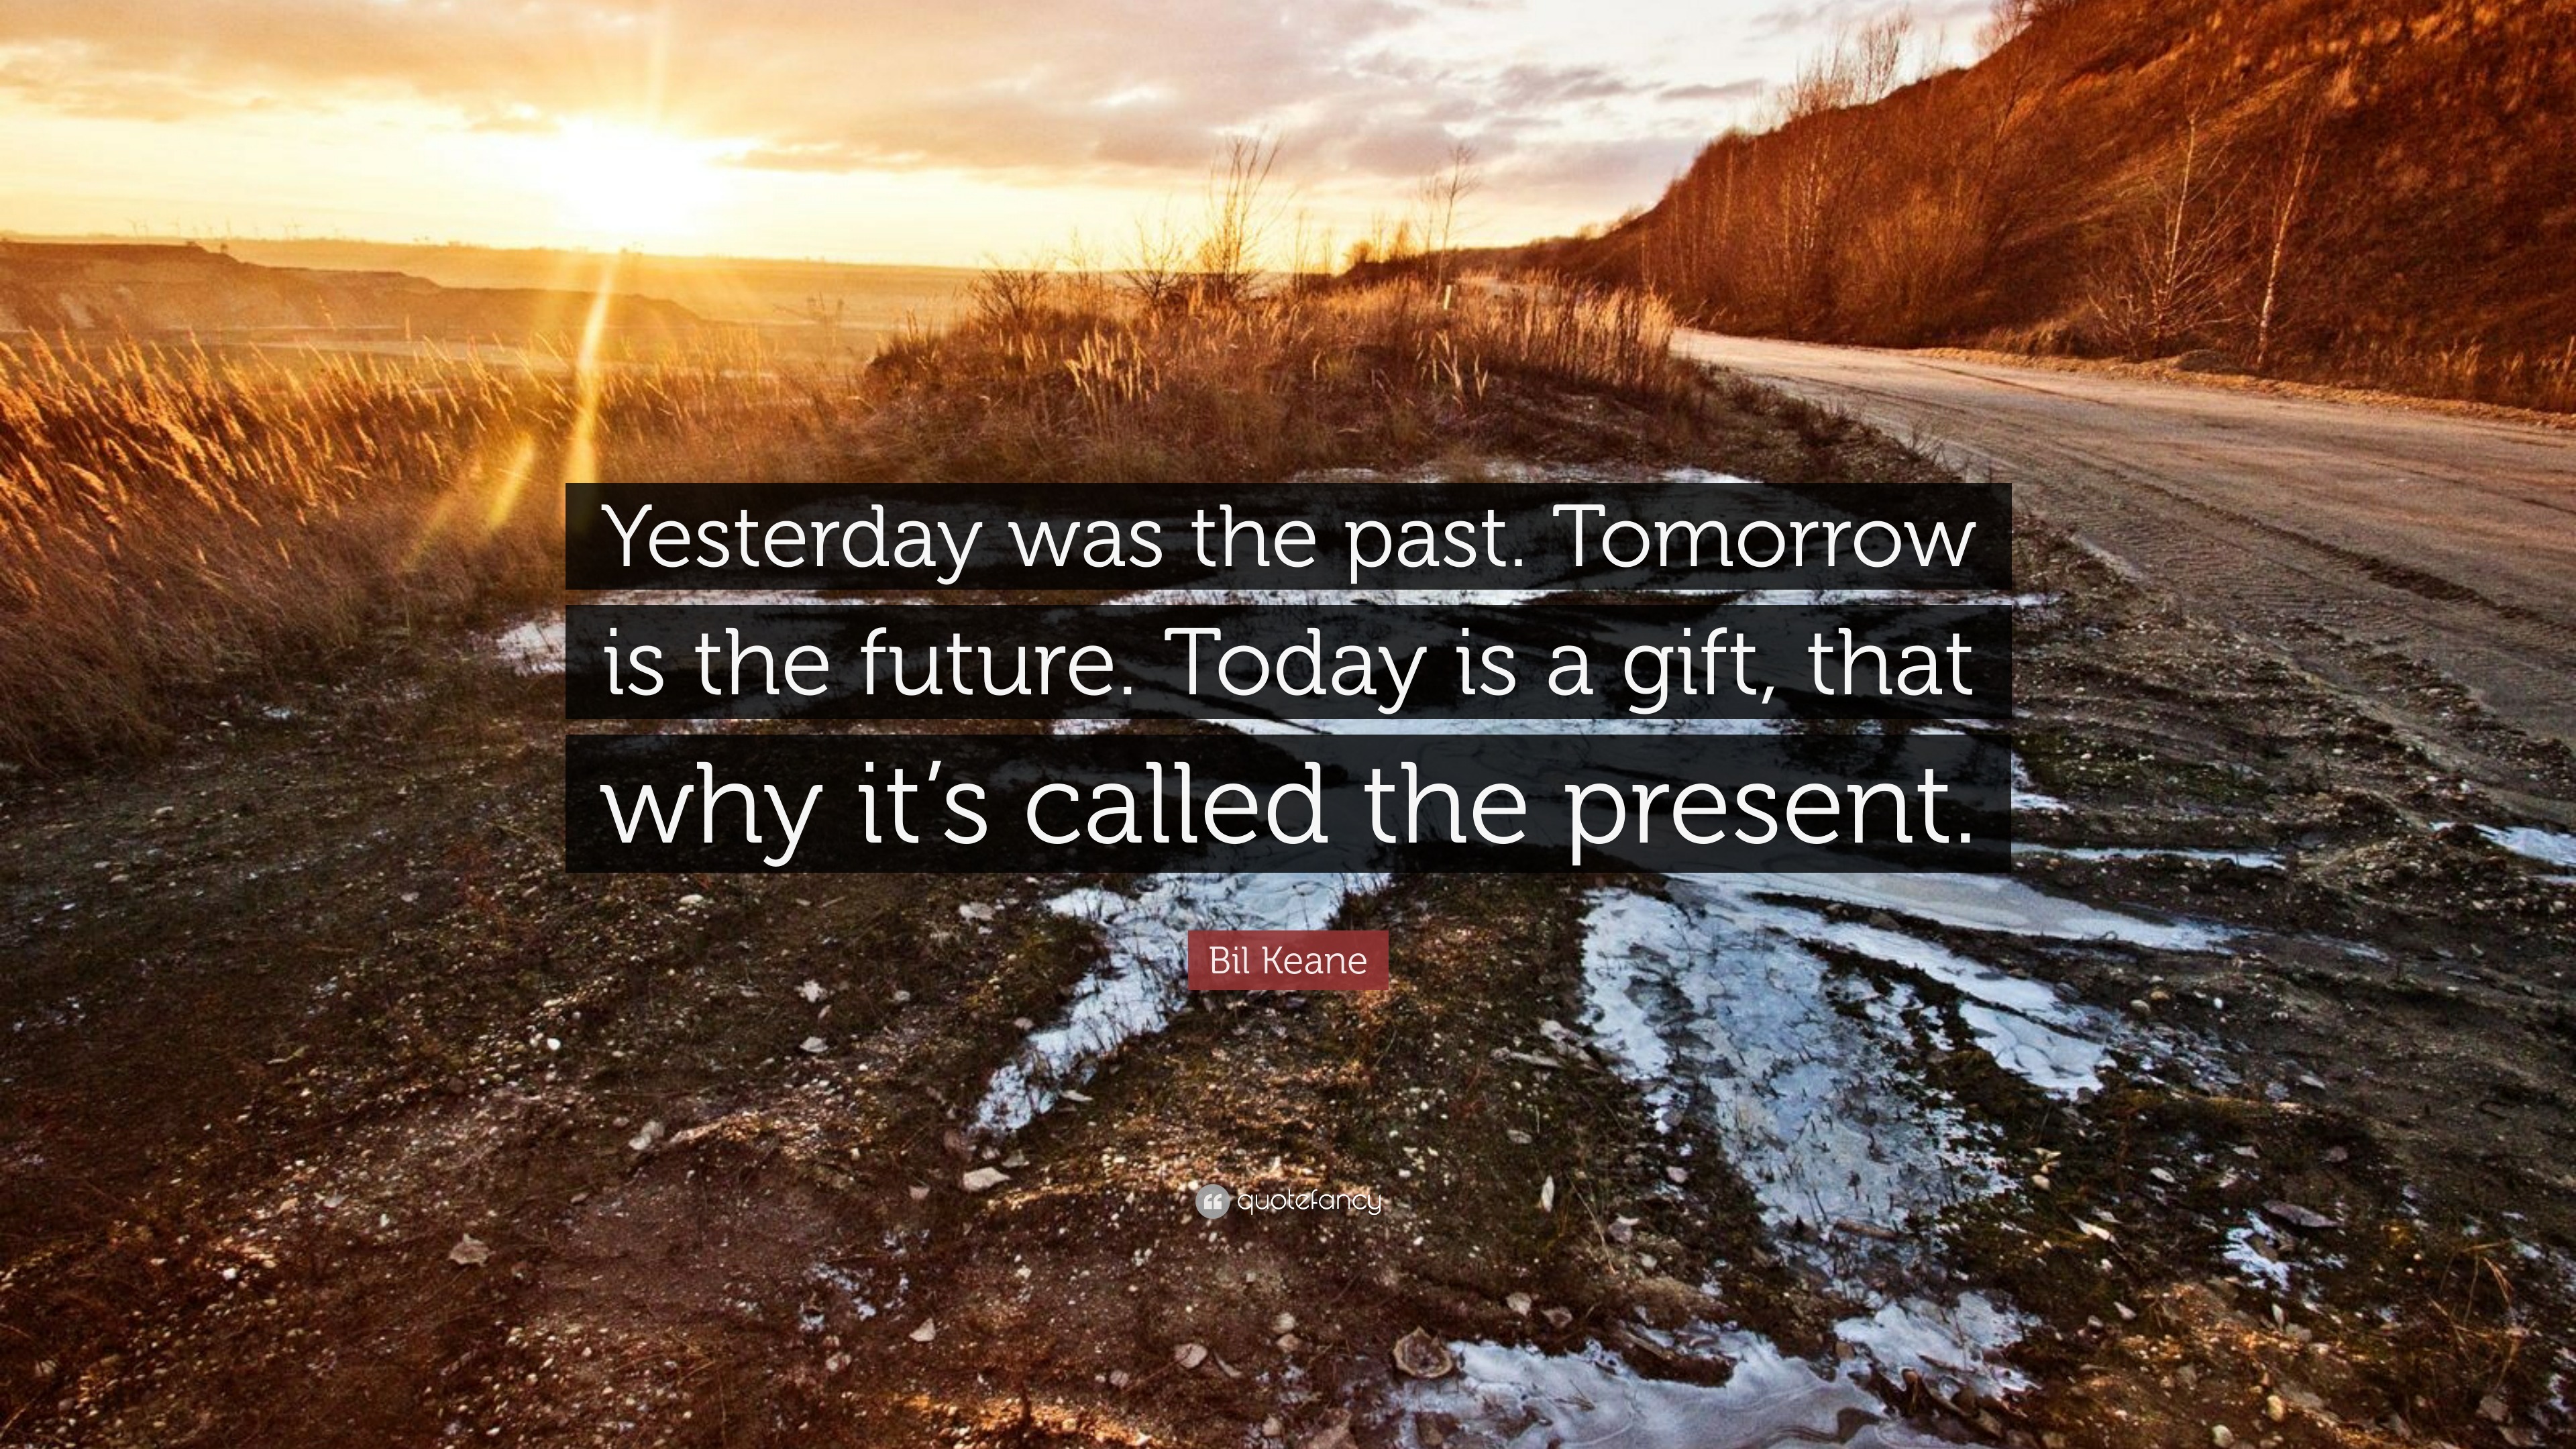 Bil Keane Quote “Yesterday was the past. Tomorrow is the future. Today